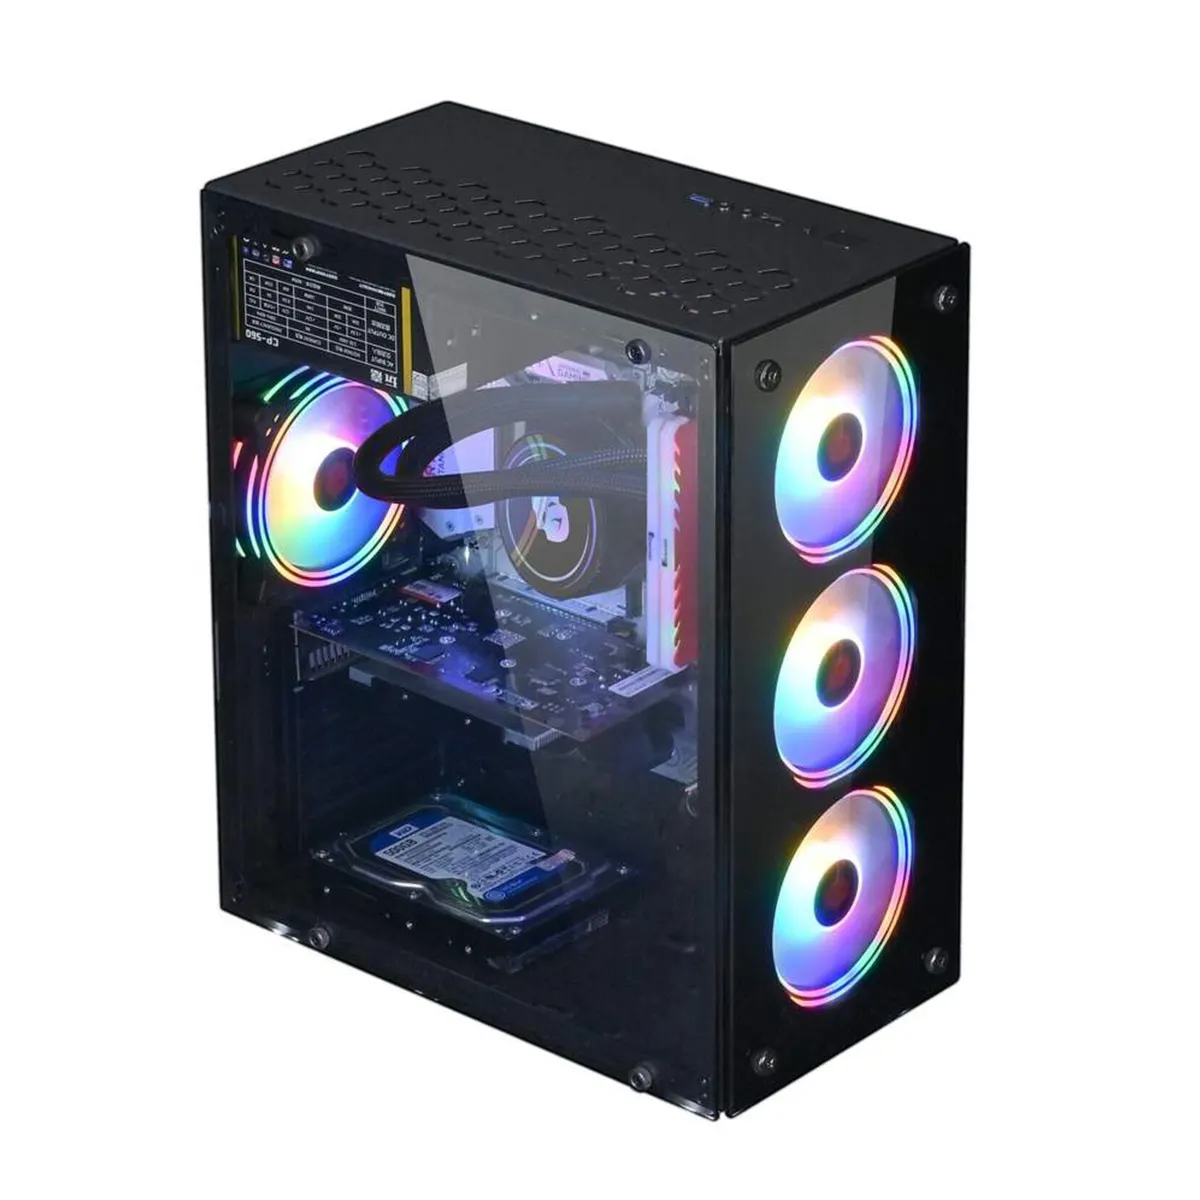 Gaming PC case ATX/ITX/M-ATX full view Tempered glass side panel Front Gaming Computer Case